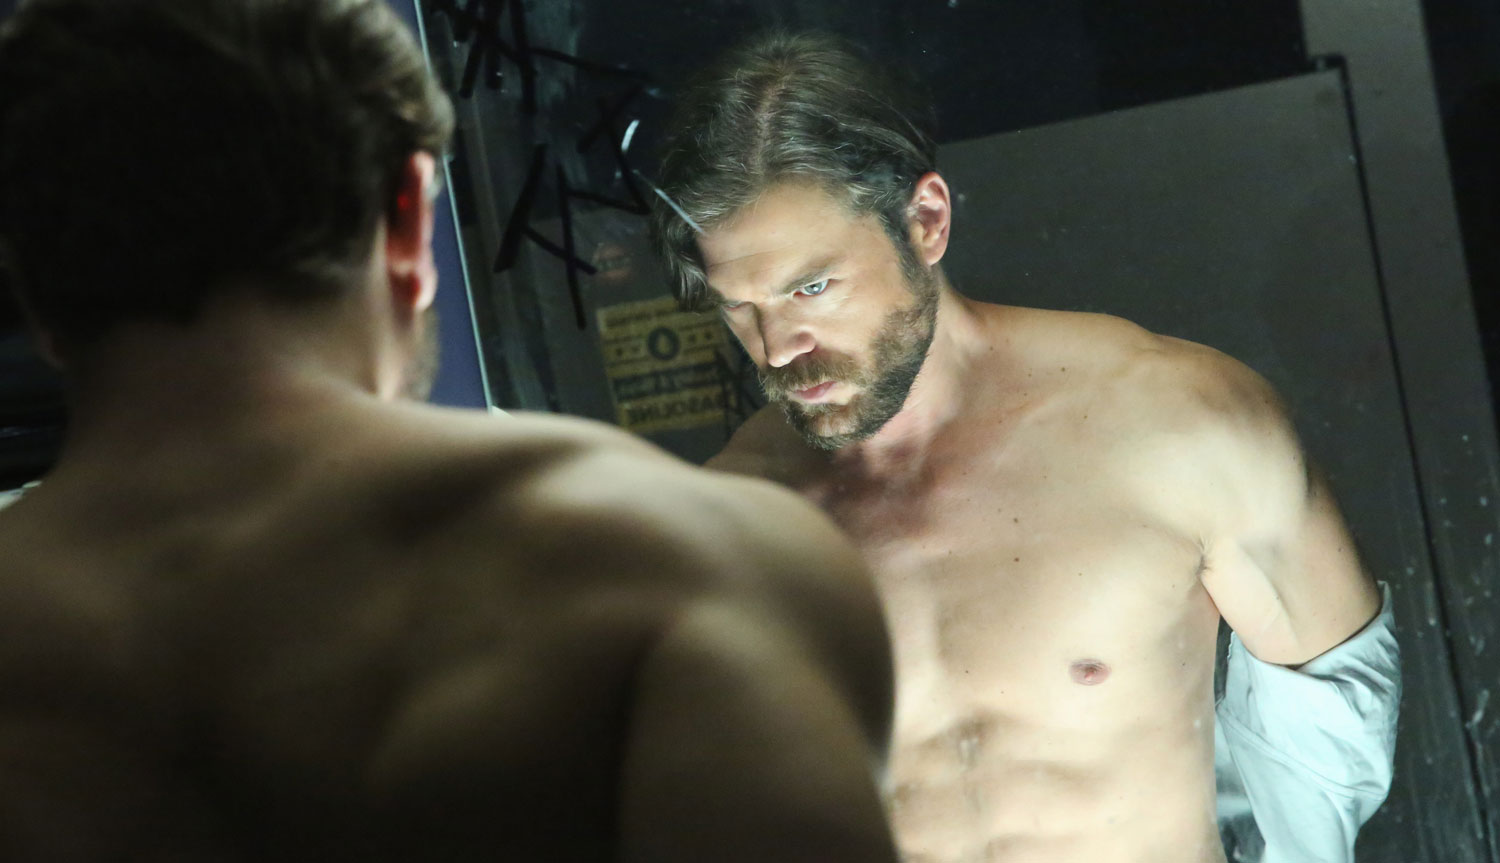 Charlie Weber shows off his hot bod while ripping off his shirt in one of t...